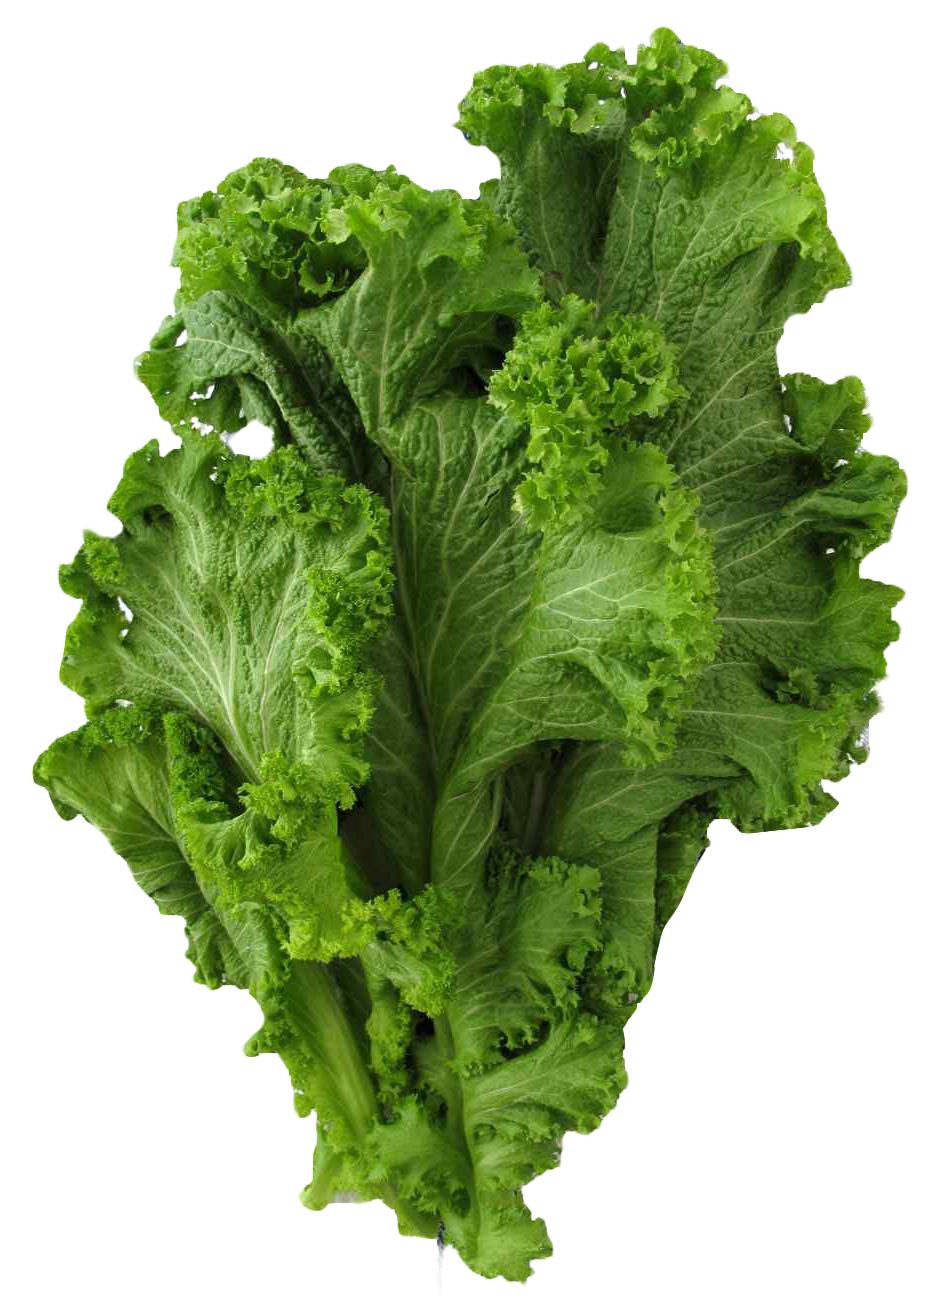 A Green Leafy Vegetable On A Black Background